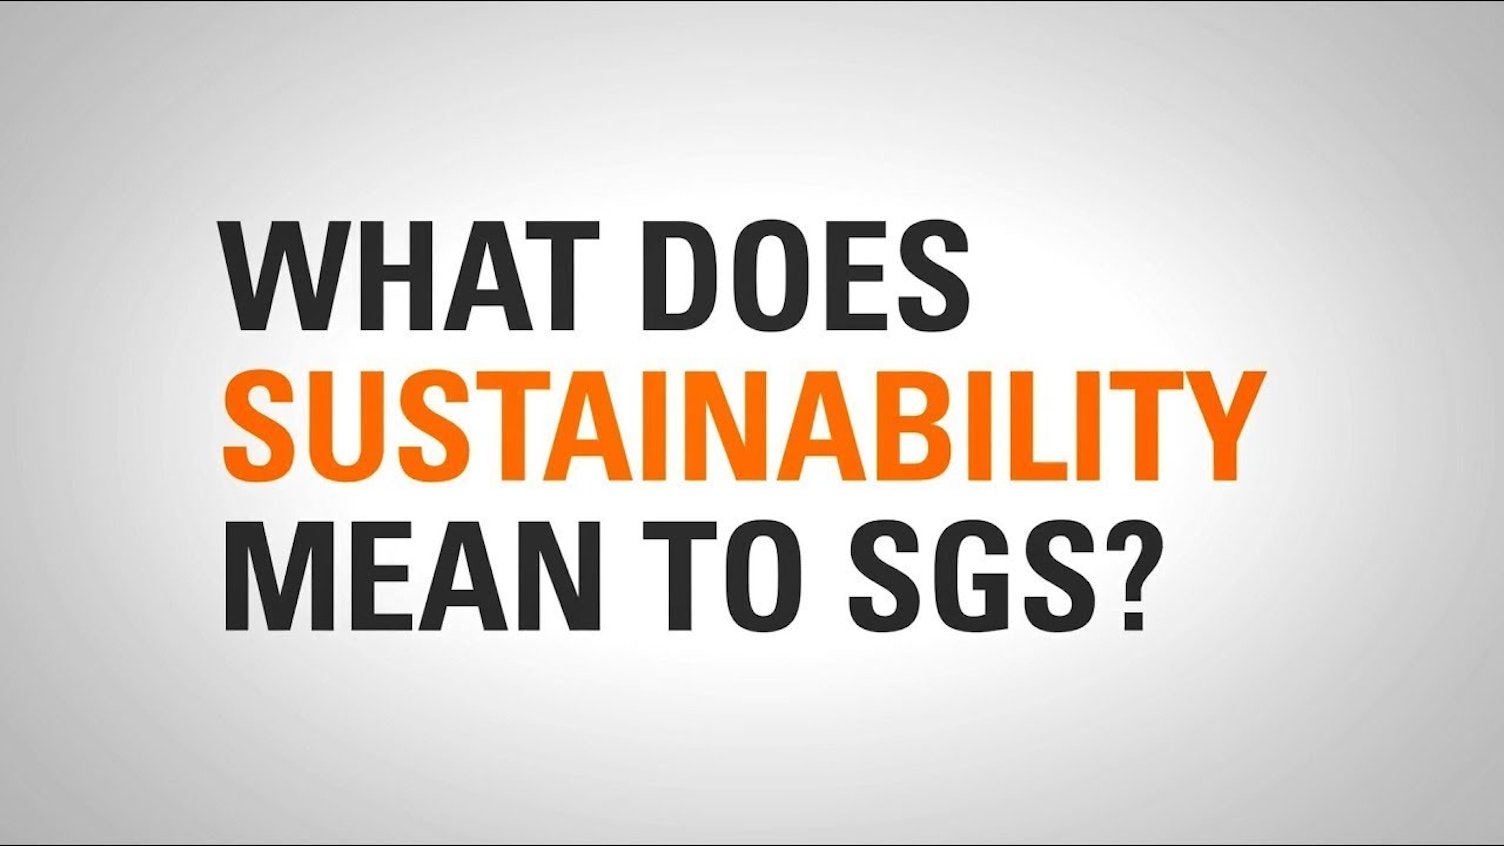 Sustainability at SGS